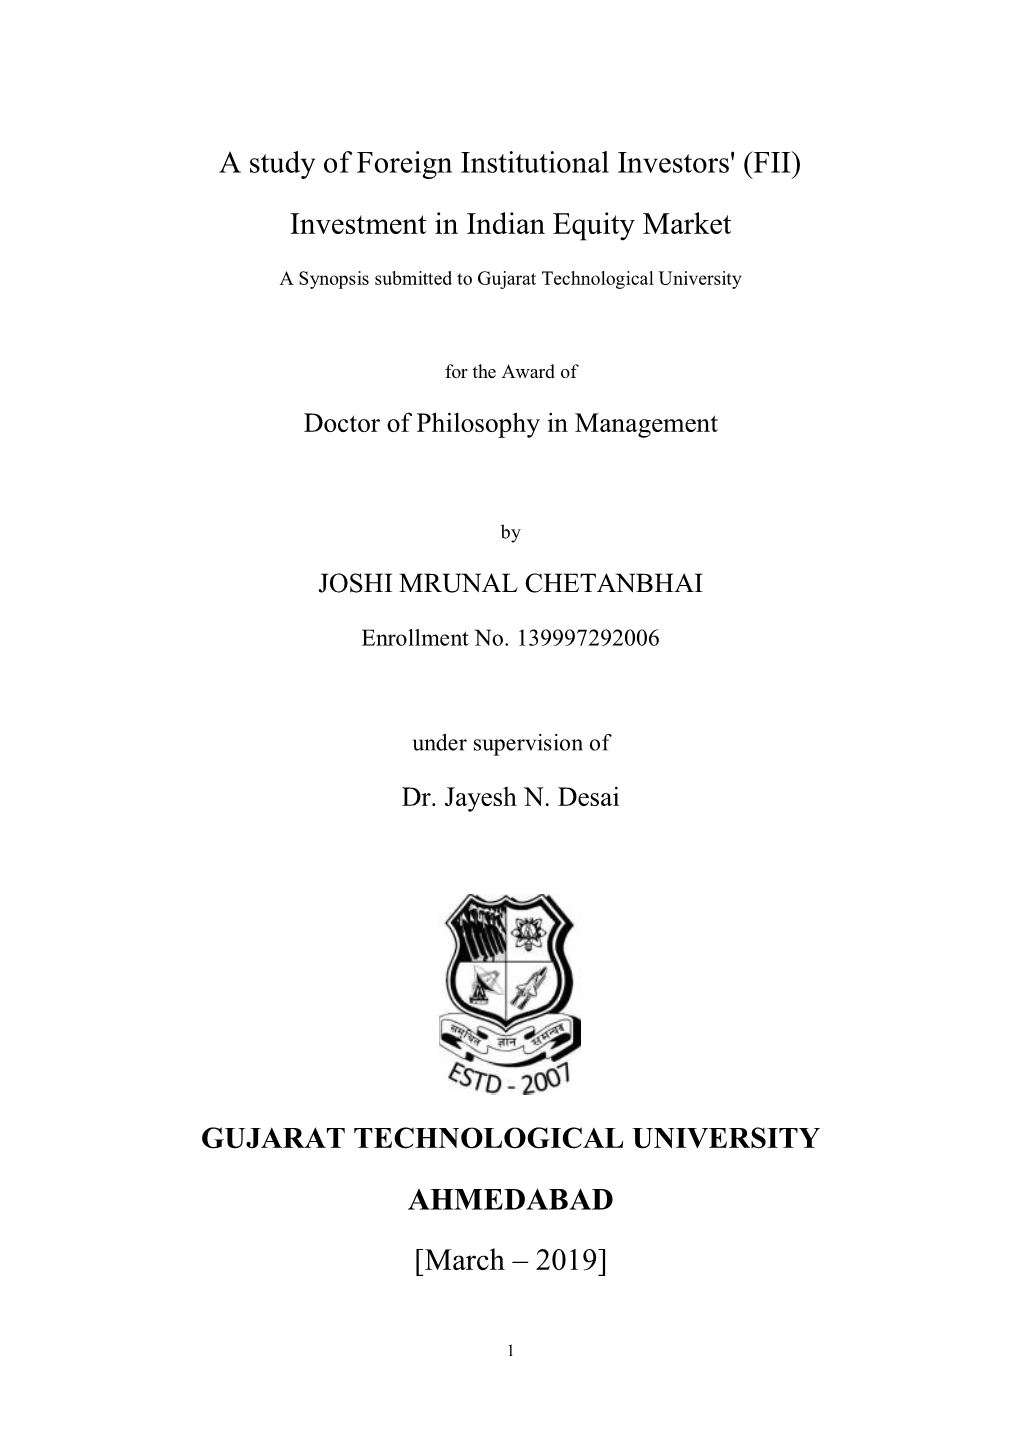 A Study of Foreign Institutional Investors' (FII) Investment in Indian Equity Market